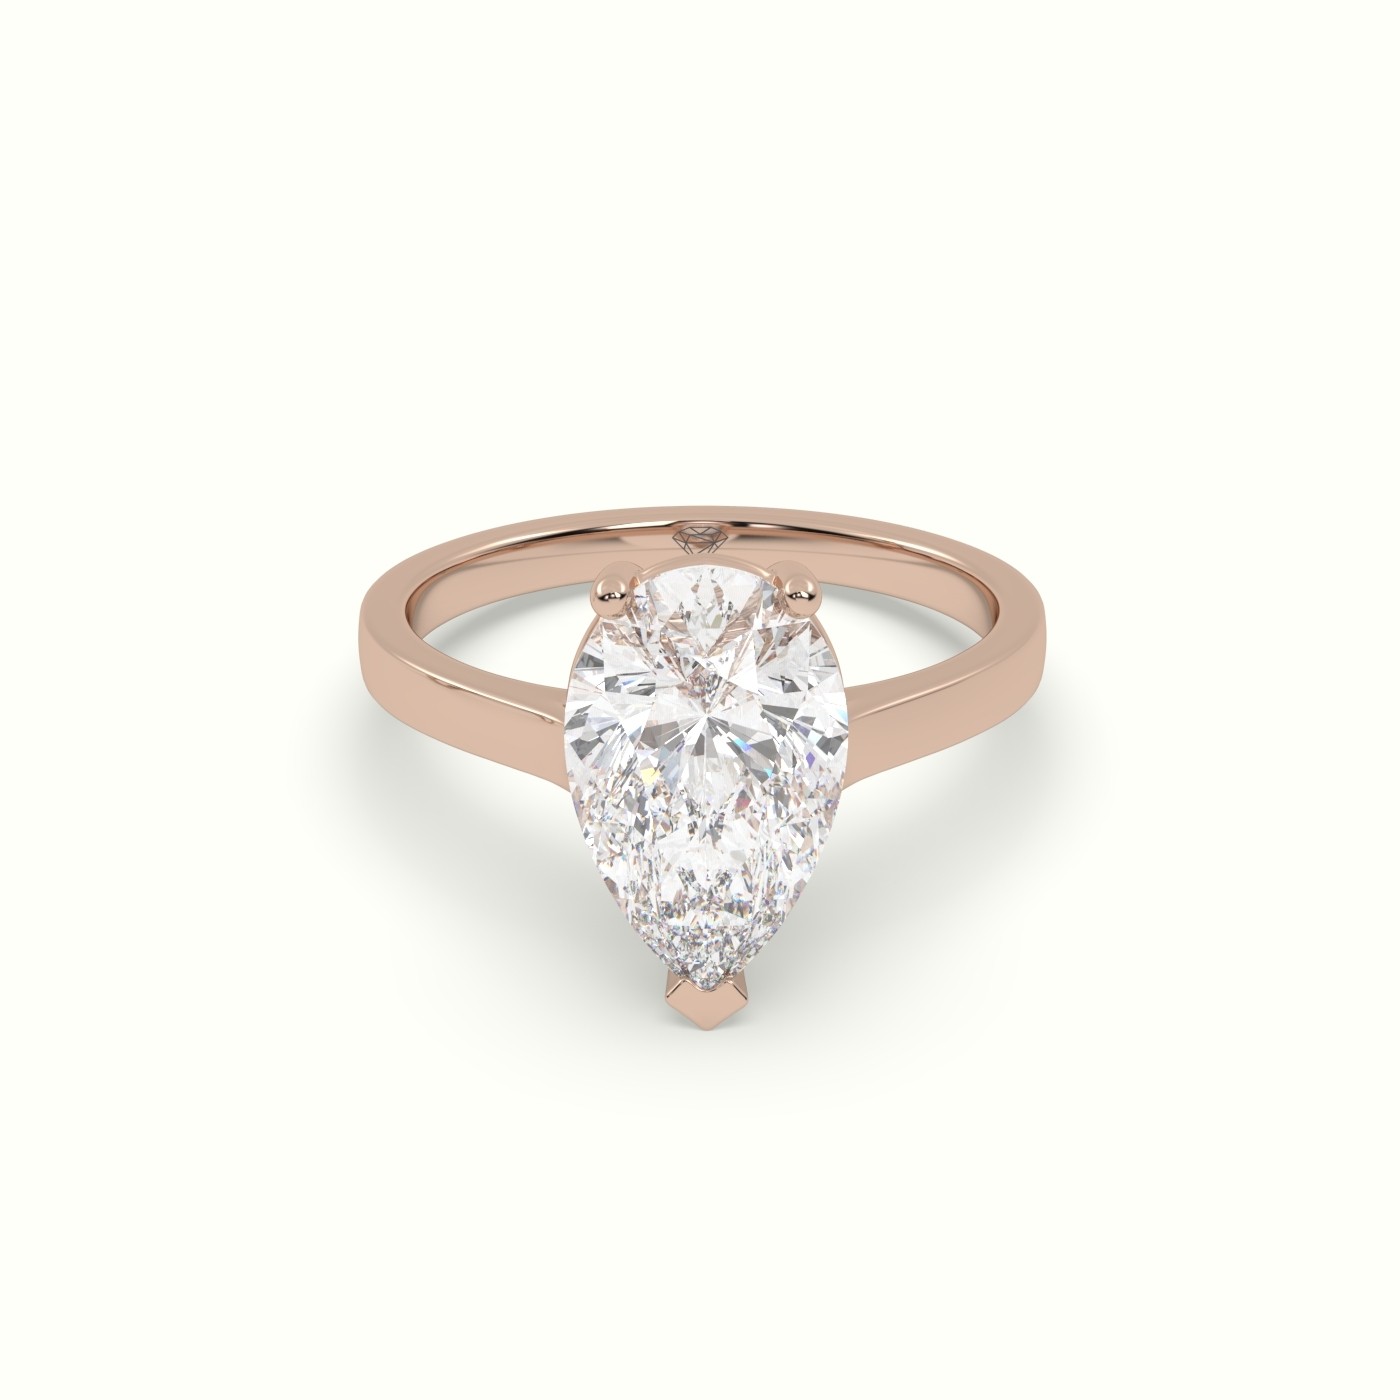 18K ROSE GOLD PEAR SHAPE DIAMOND SOLITAIRE ENGAGEMENT RING 3 PRONGS